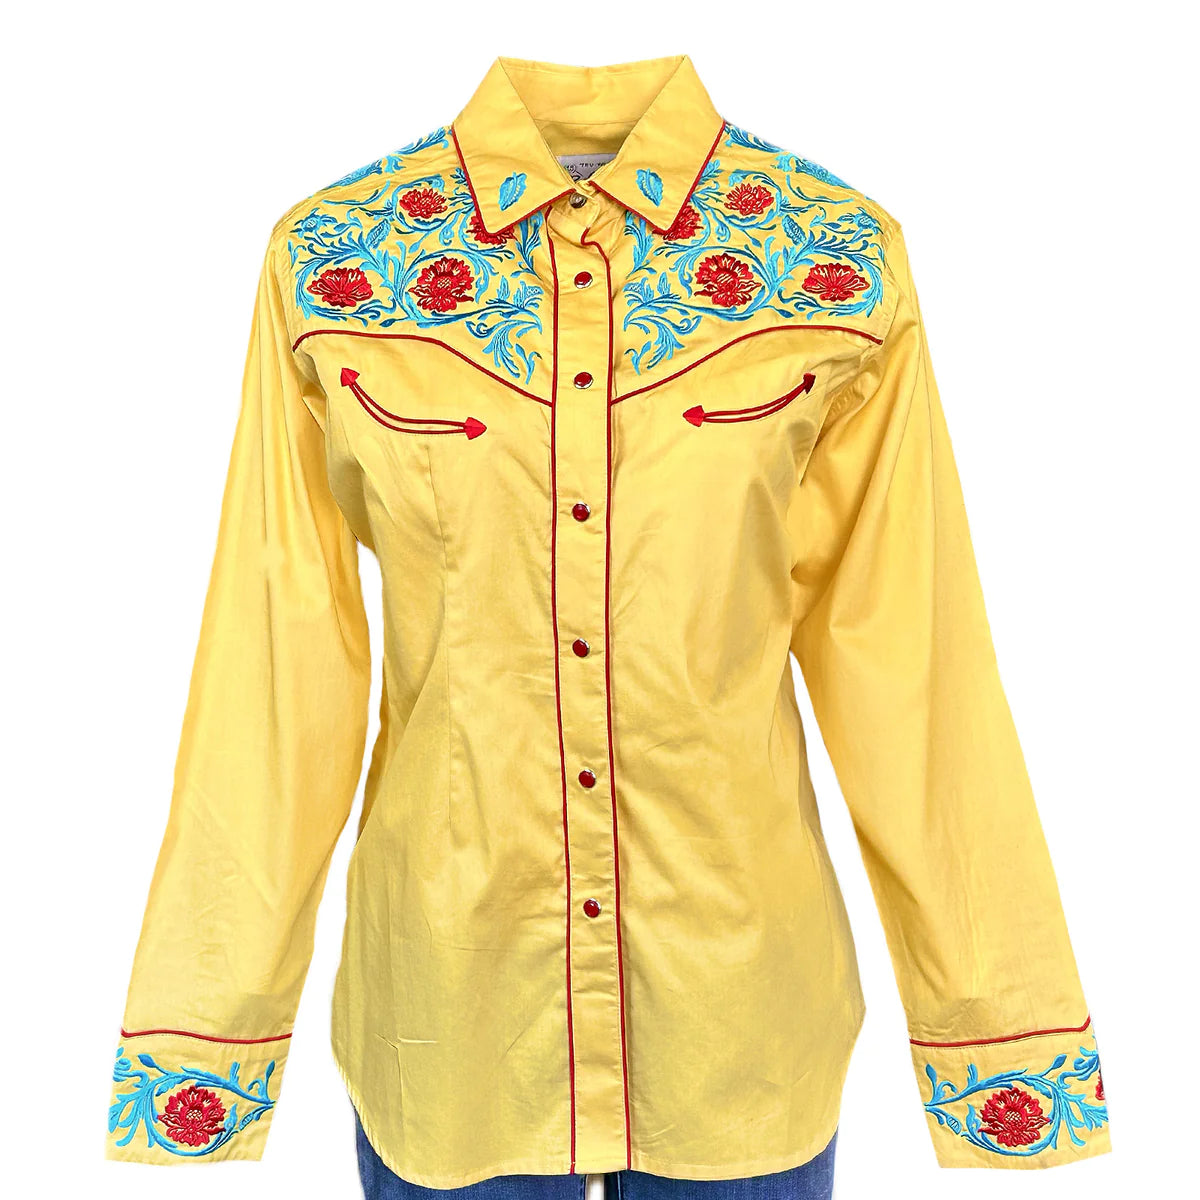 Rockmount Ranch Wear Women's Vintage Western Shirt with Fancy Floral Embroidery Front